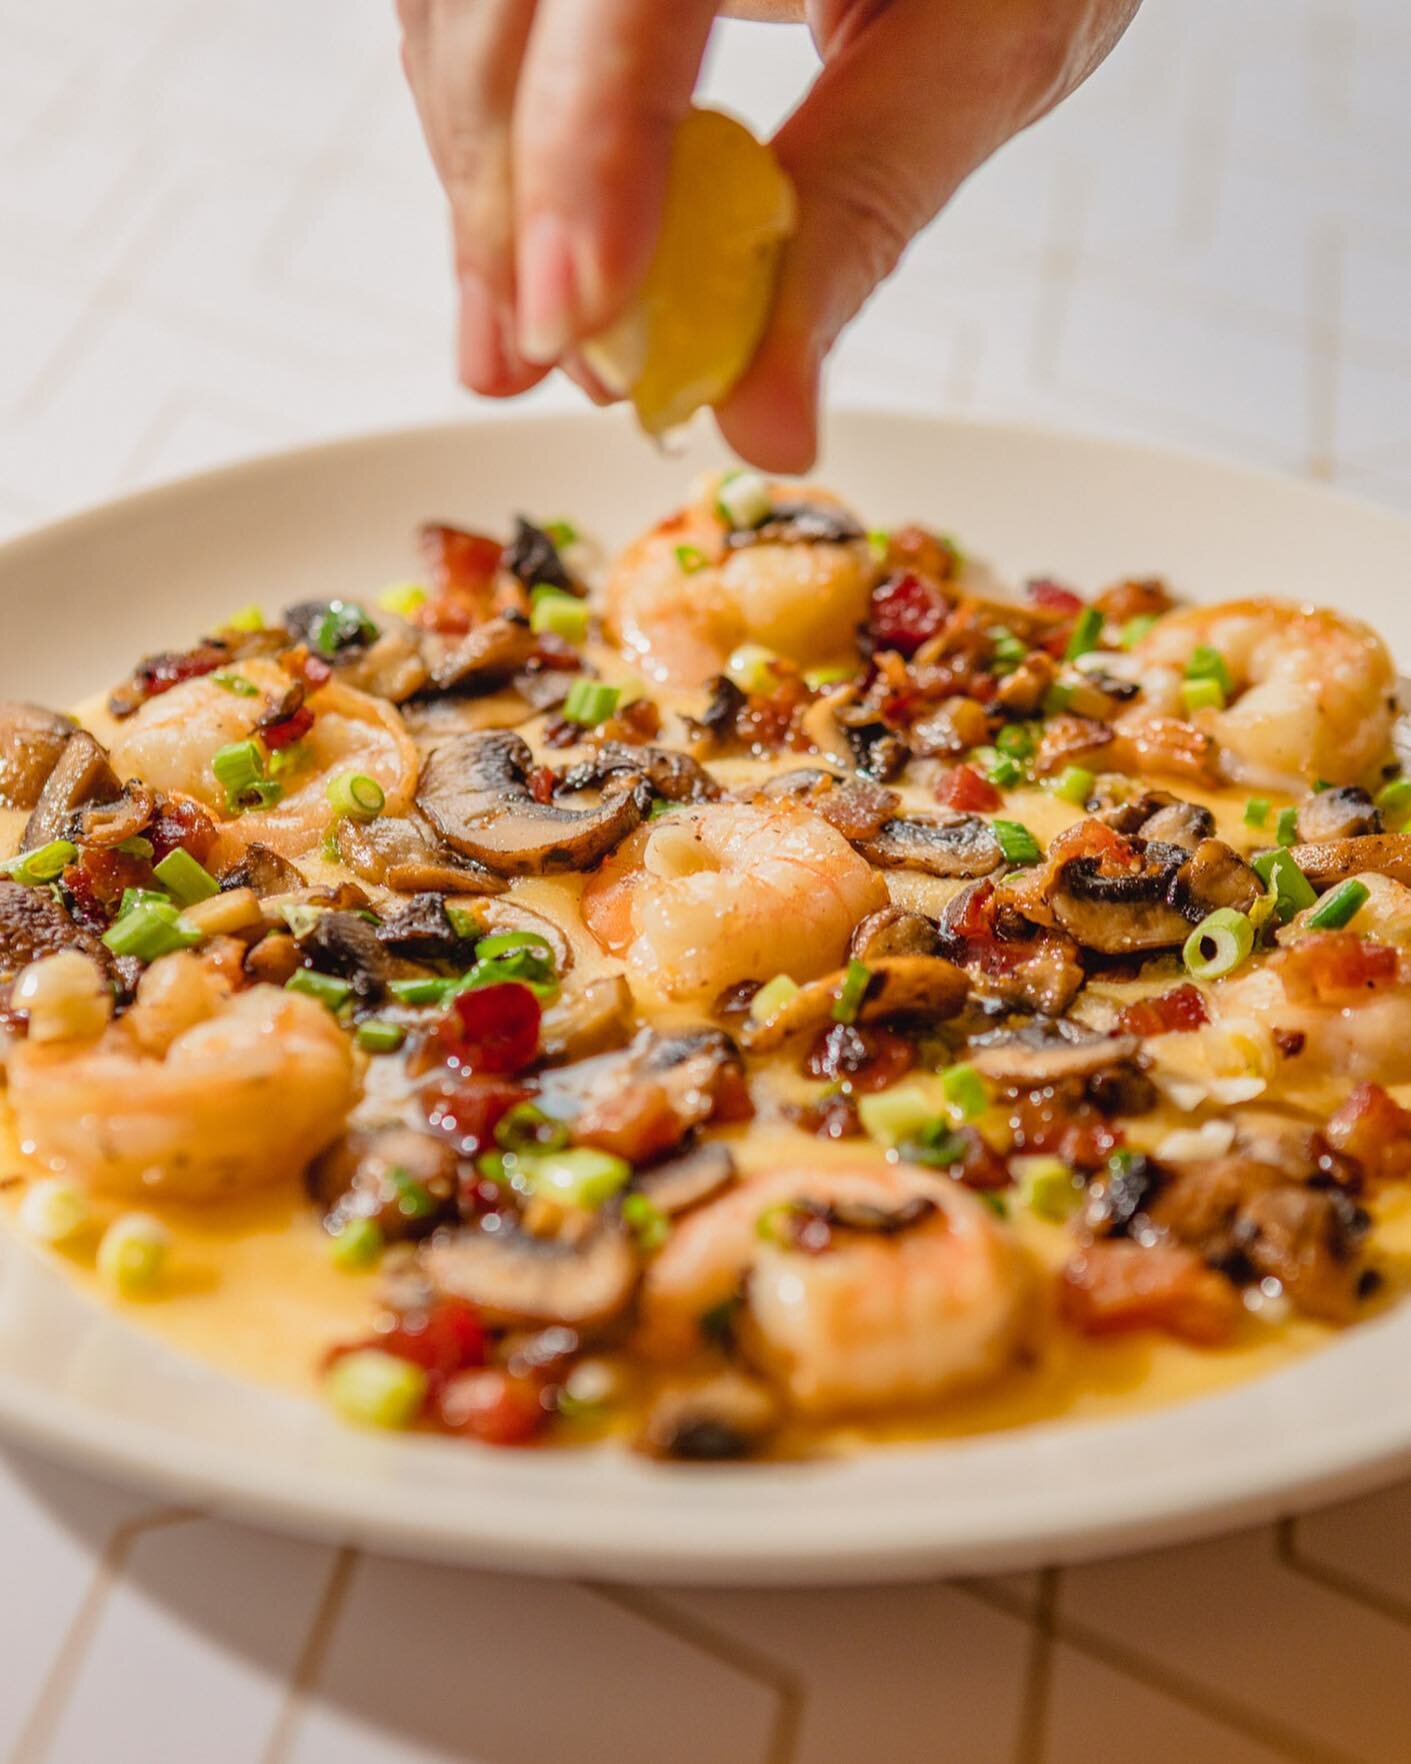 Our @crookscornerchapelhill inspired Shrimp &amp; Grits has all of the wonderful flavors of the South and is exclusively available for Sunday brunch.

For reservations head to Resy.com or give us a call 984-439-2278 ☎️